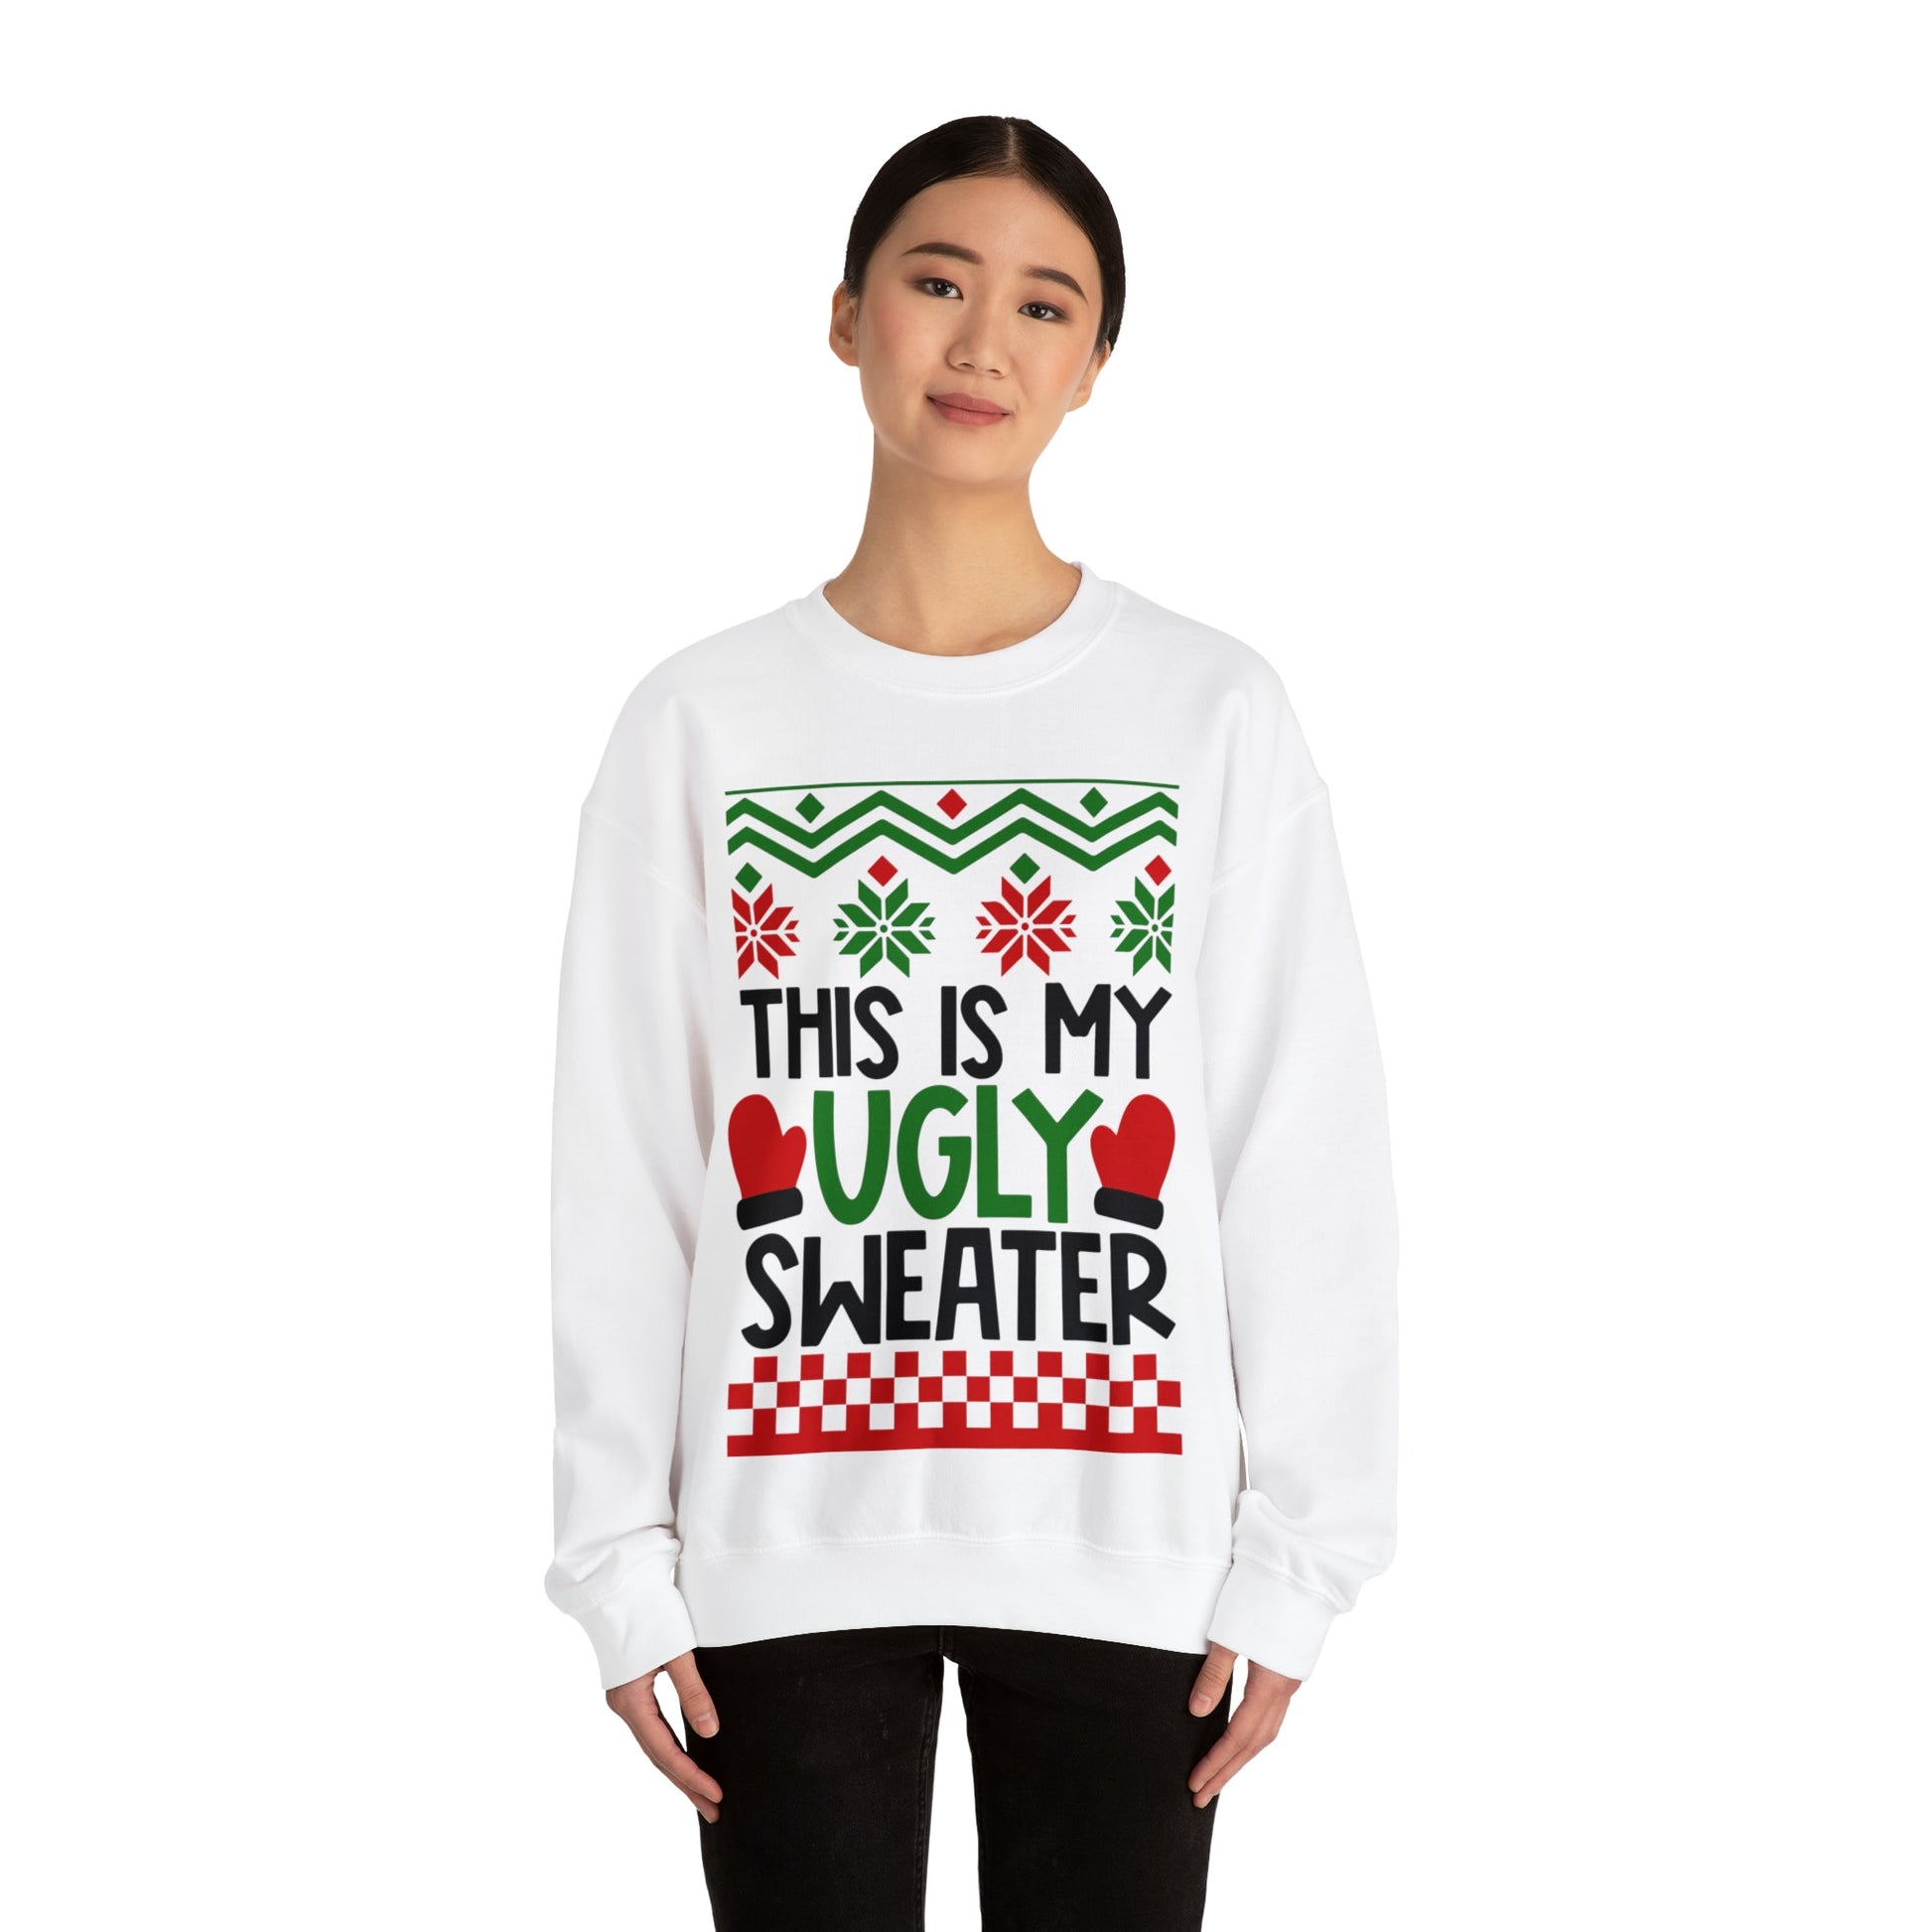 Get trendy with This is my Ugly Christmas Sweater - Sweatshirt available at Good Gift Company. Grab yours for $29.99 today!